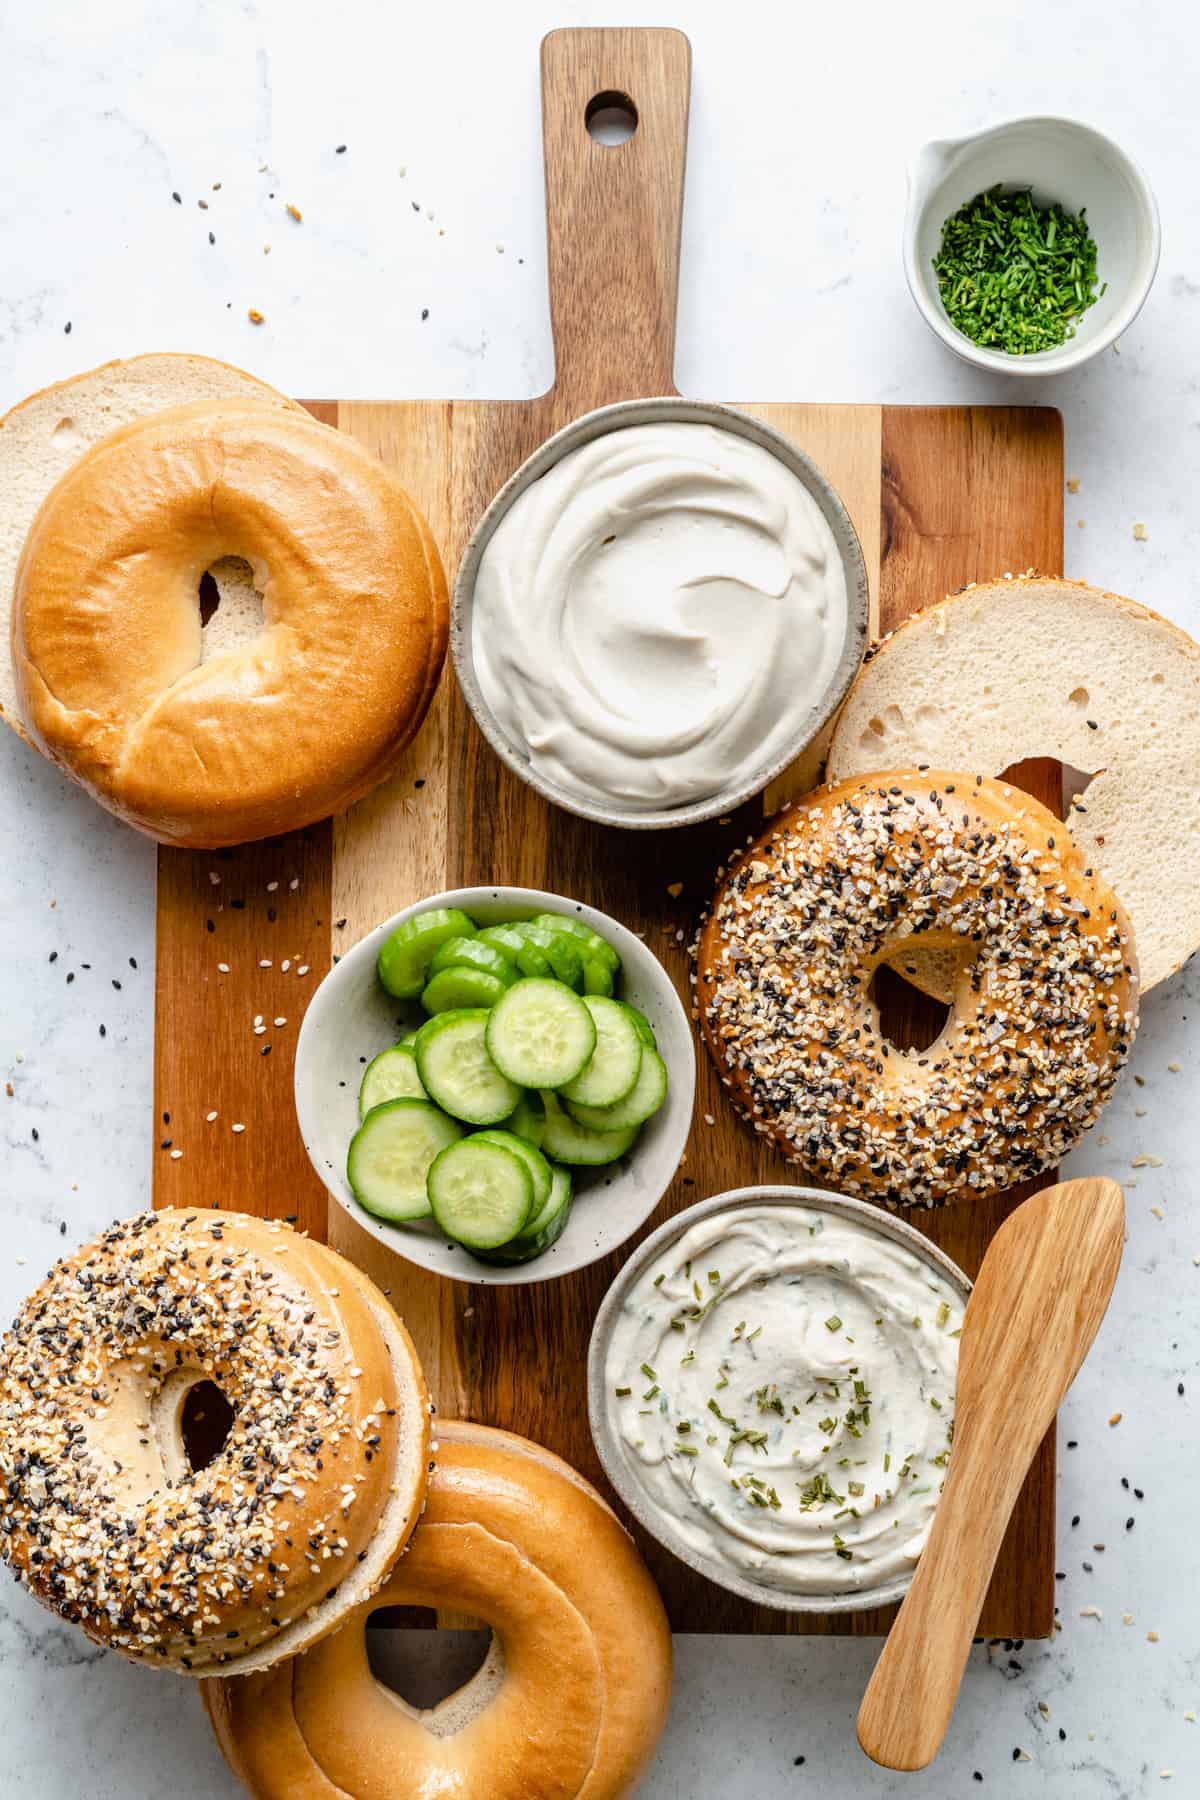 Bagels with cream cheese and cucumber slices.